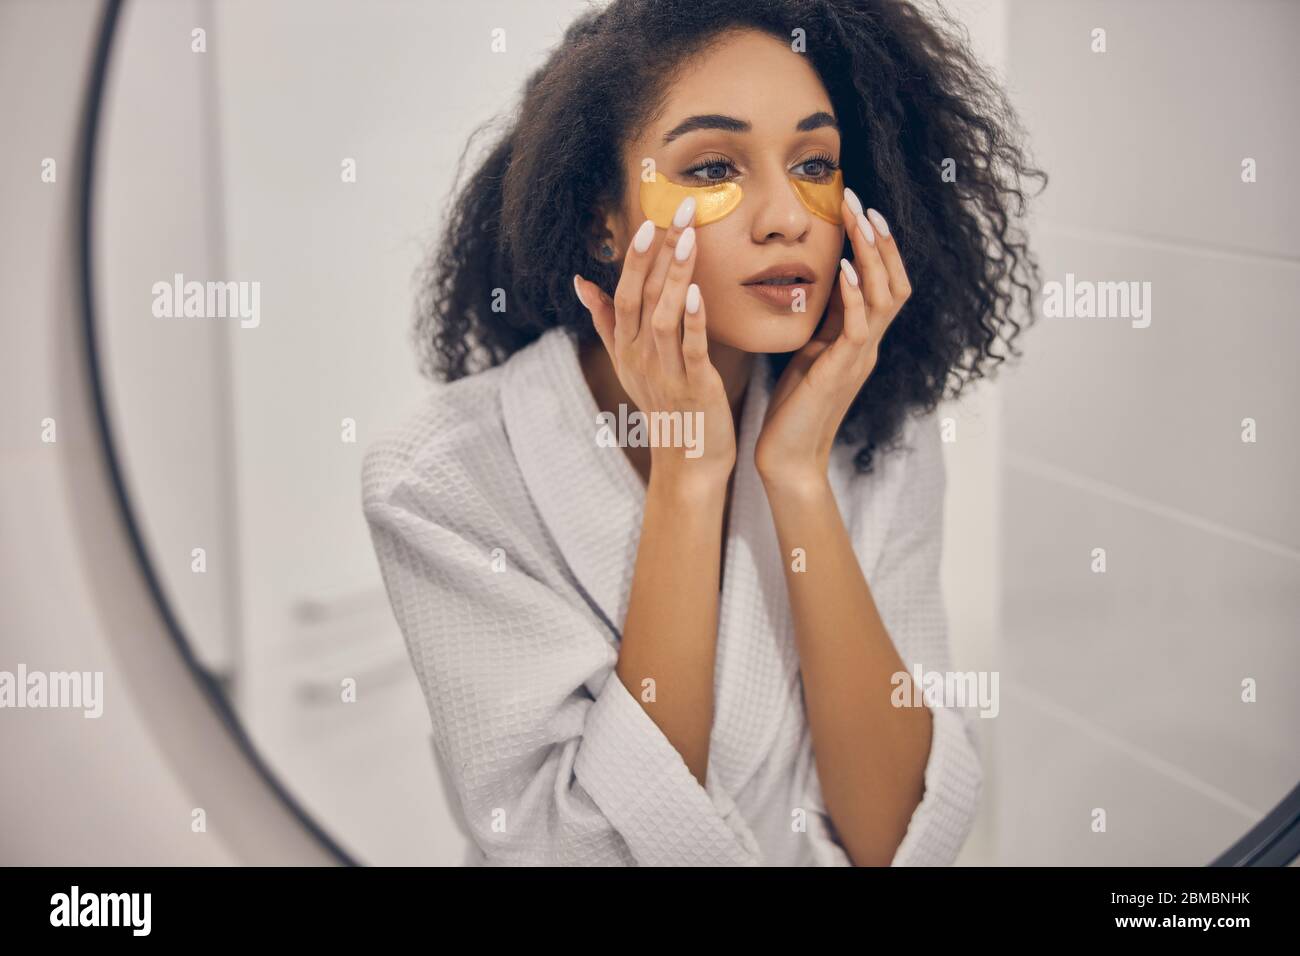 Focused pretty girl performing a beauty procedure Stock Photo